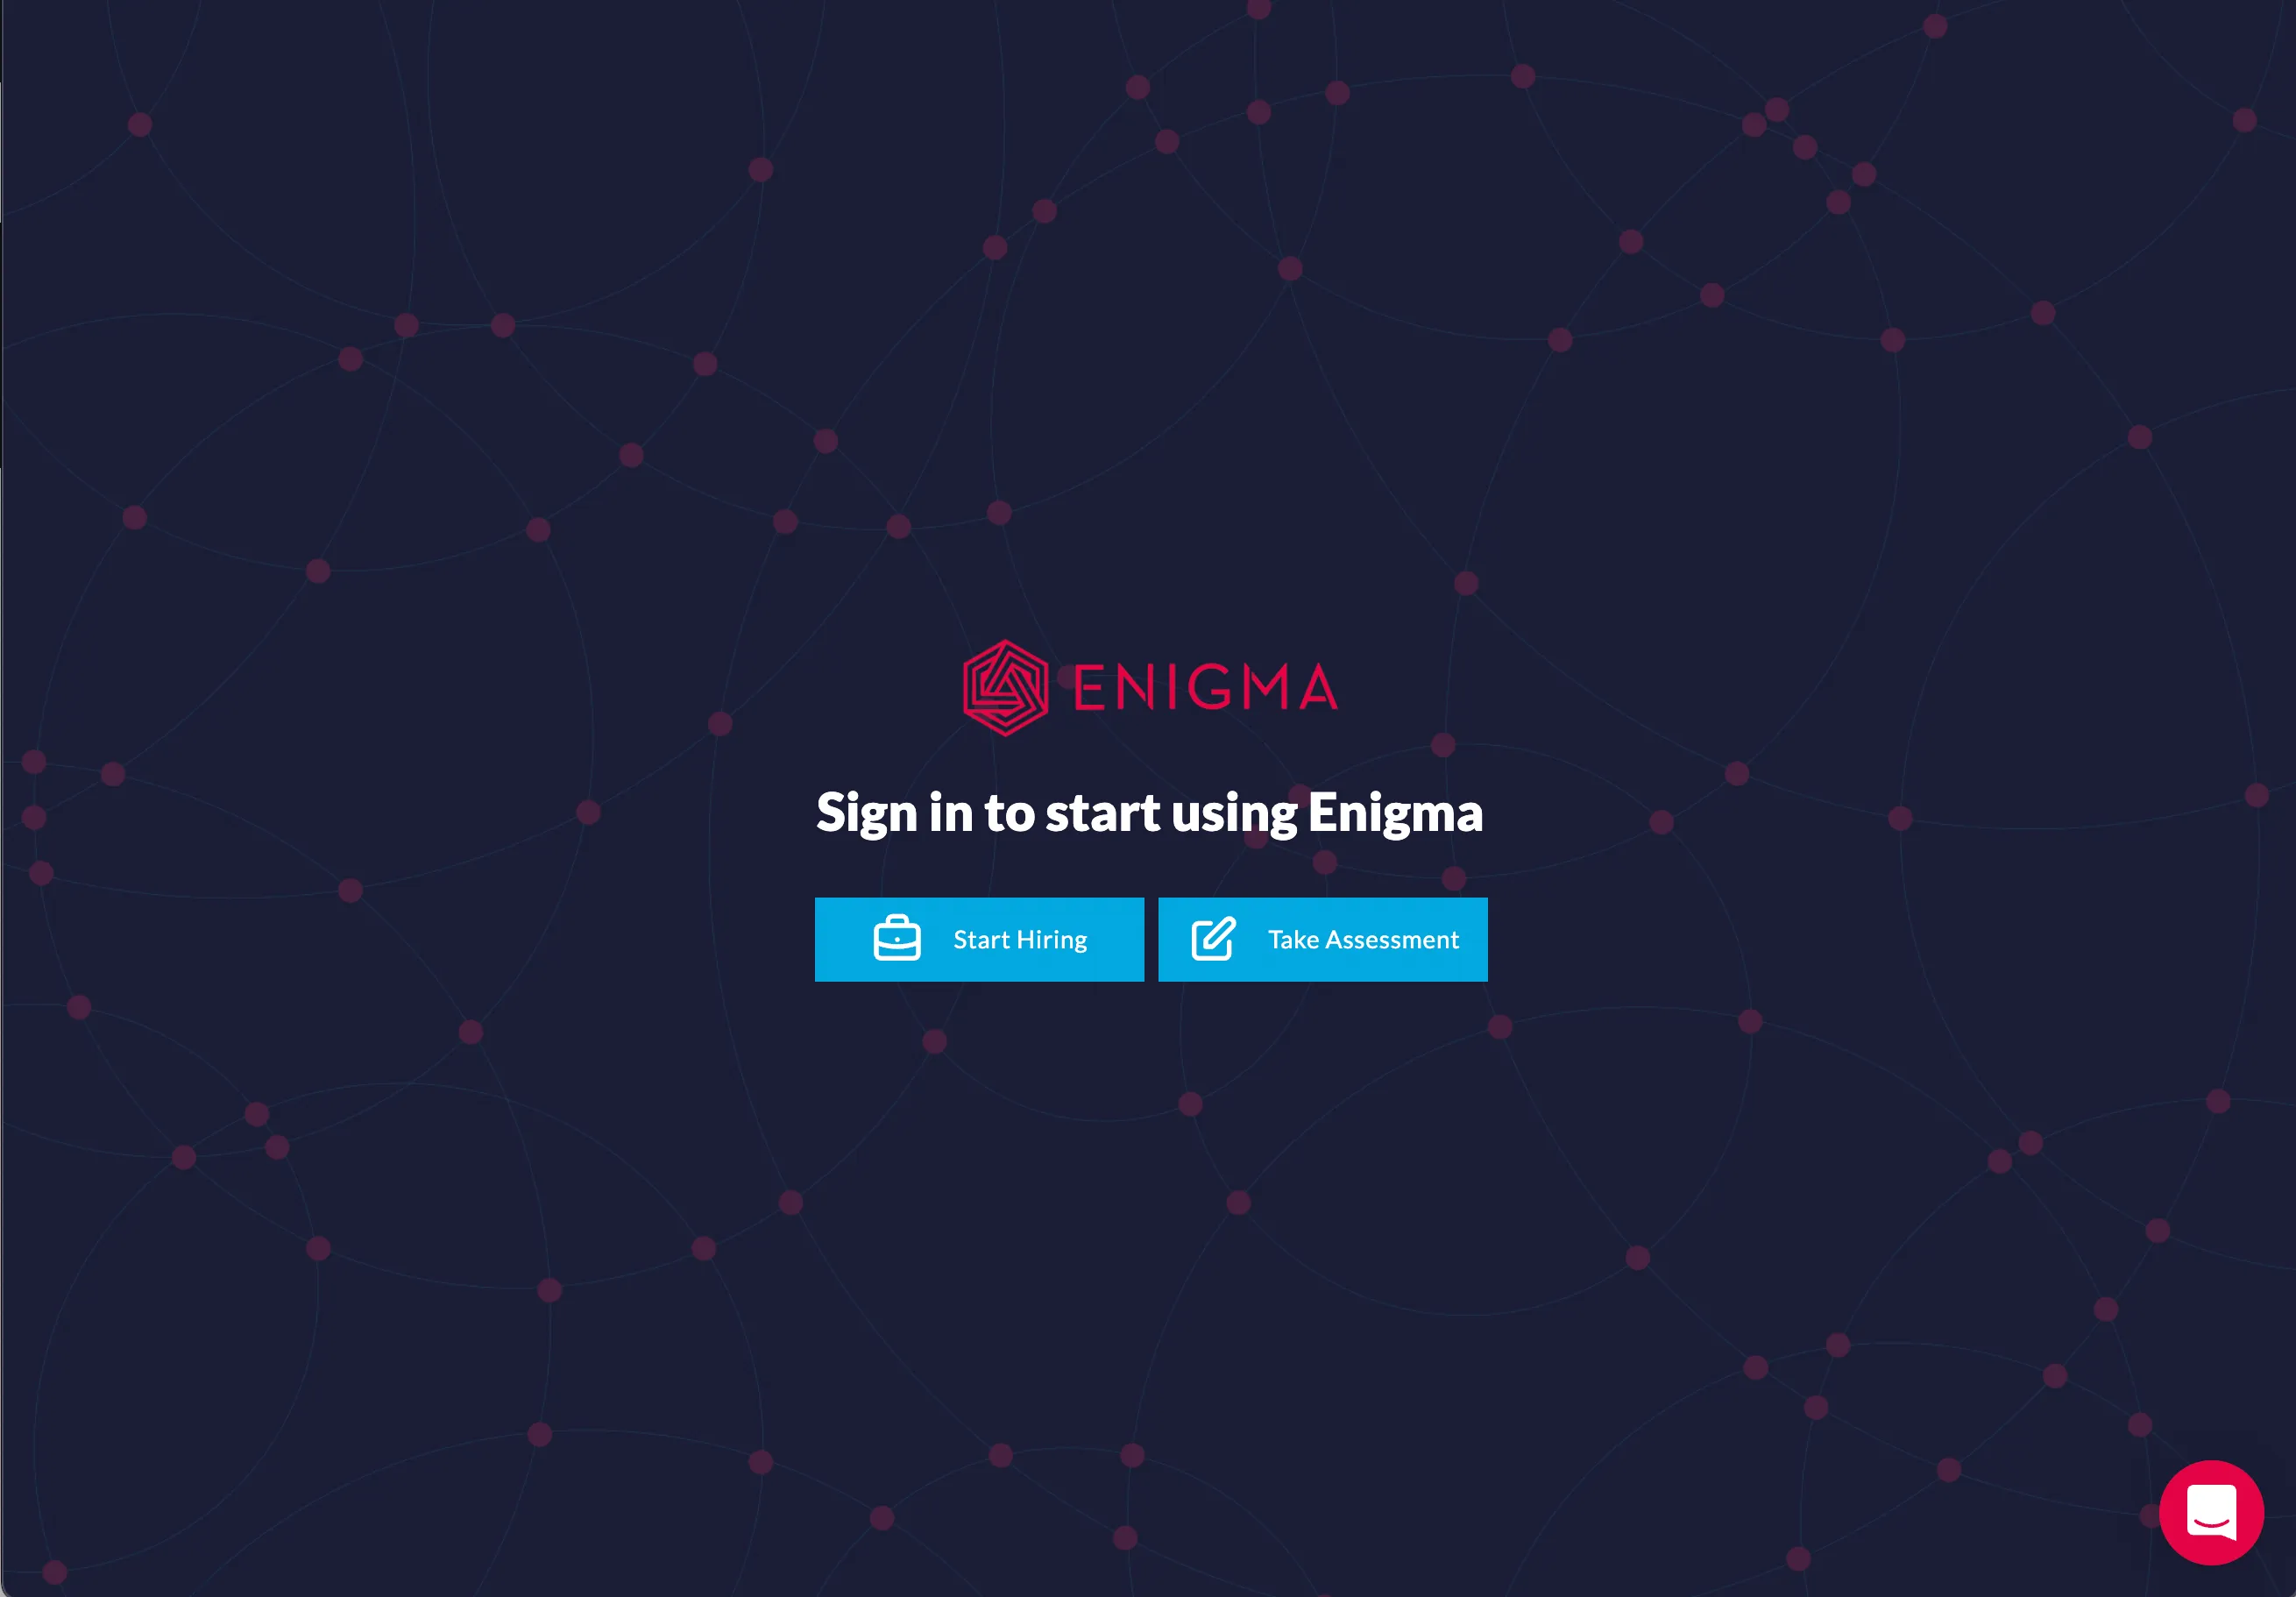 The Enigma login page